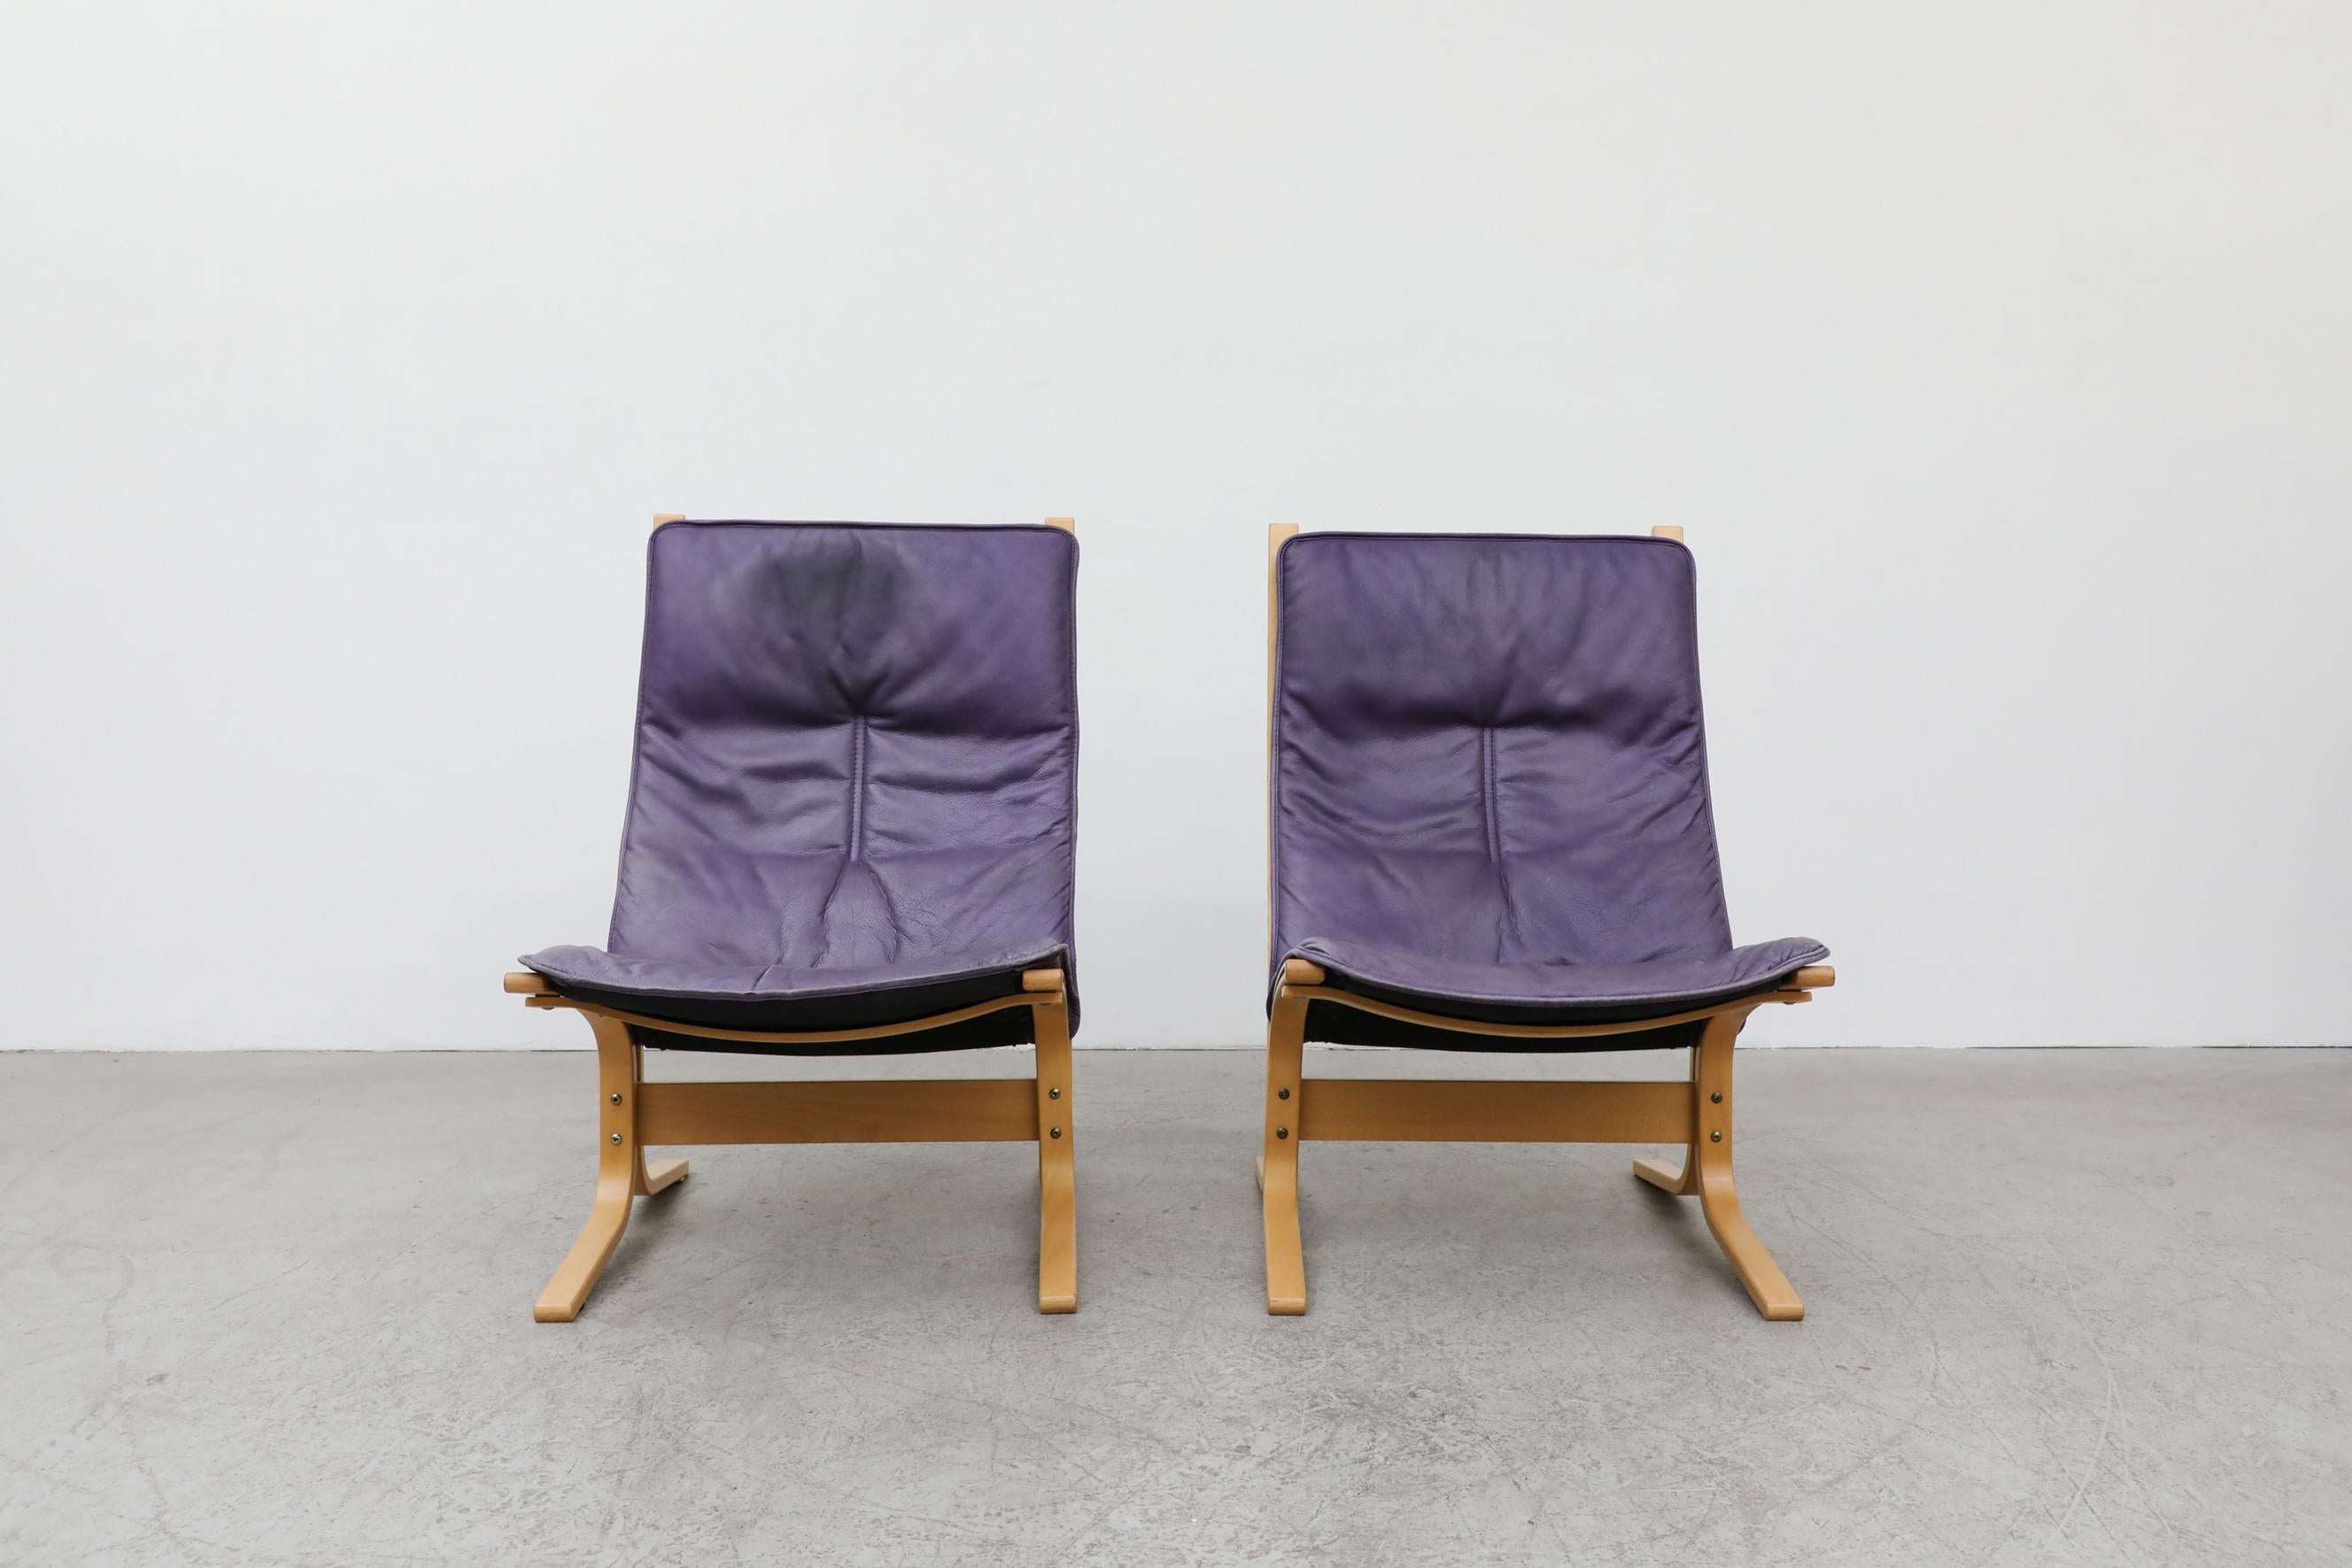 Pair of purple leather westnofa lounge chairs with bentwood frames and original leather cushions. In good original condition with visible wear to leather and frames, including Brill Cream stains on leather. Wear is consistent with their age and use.